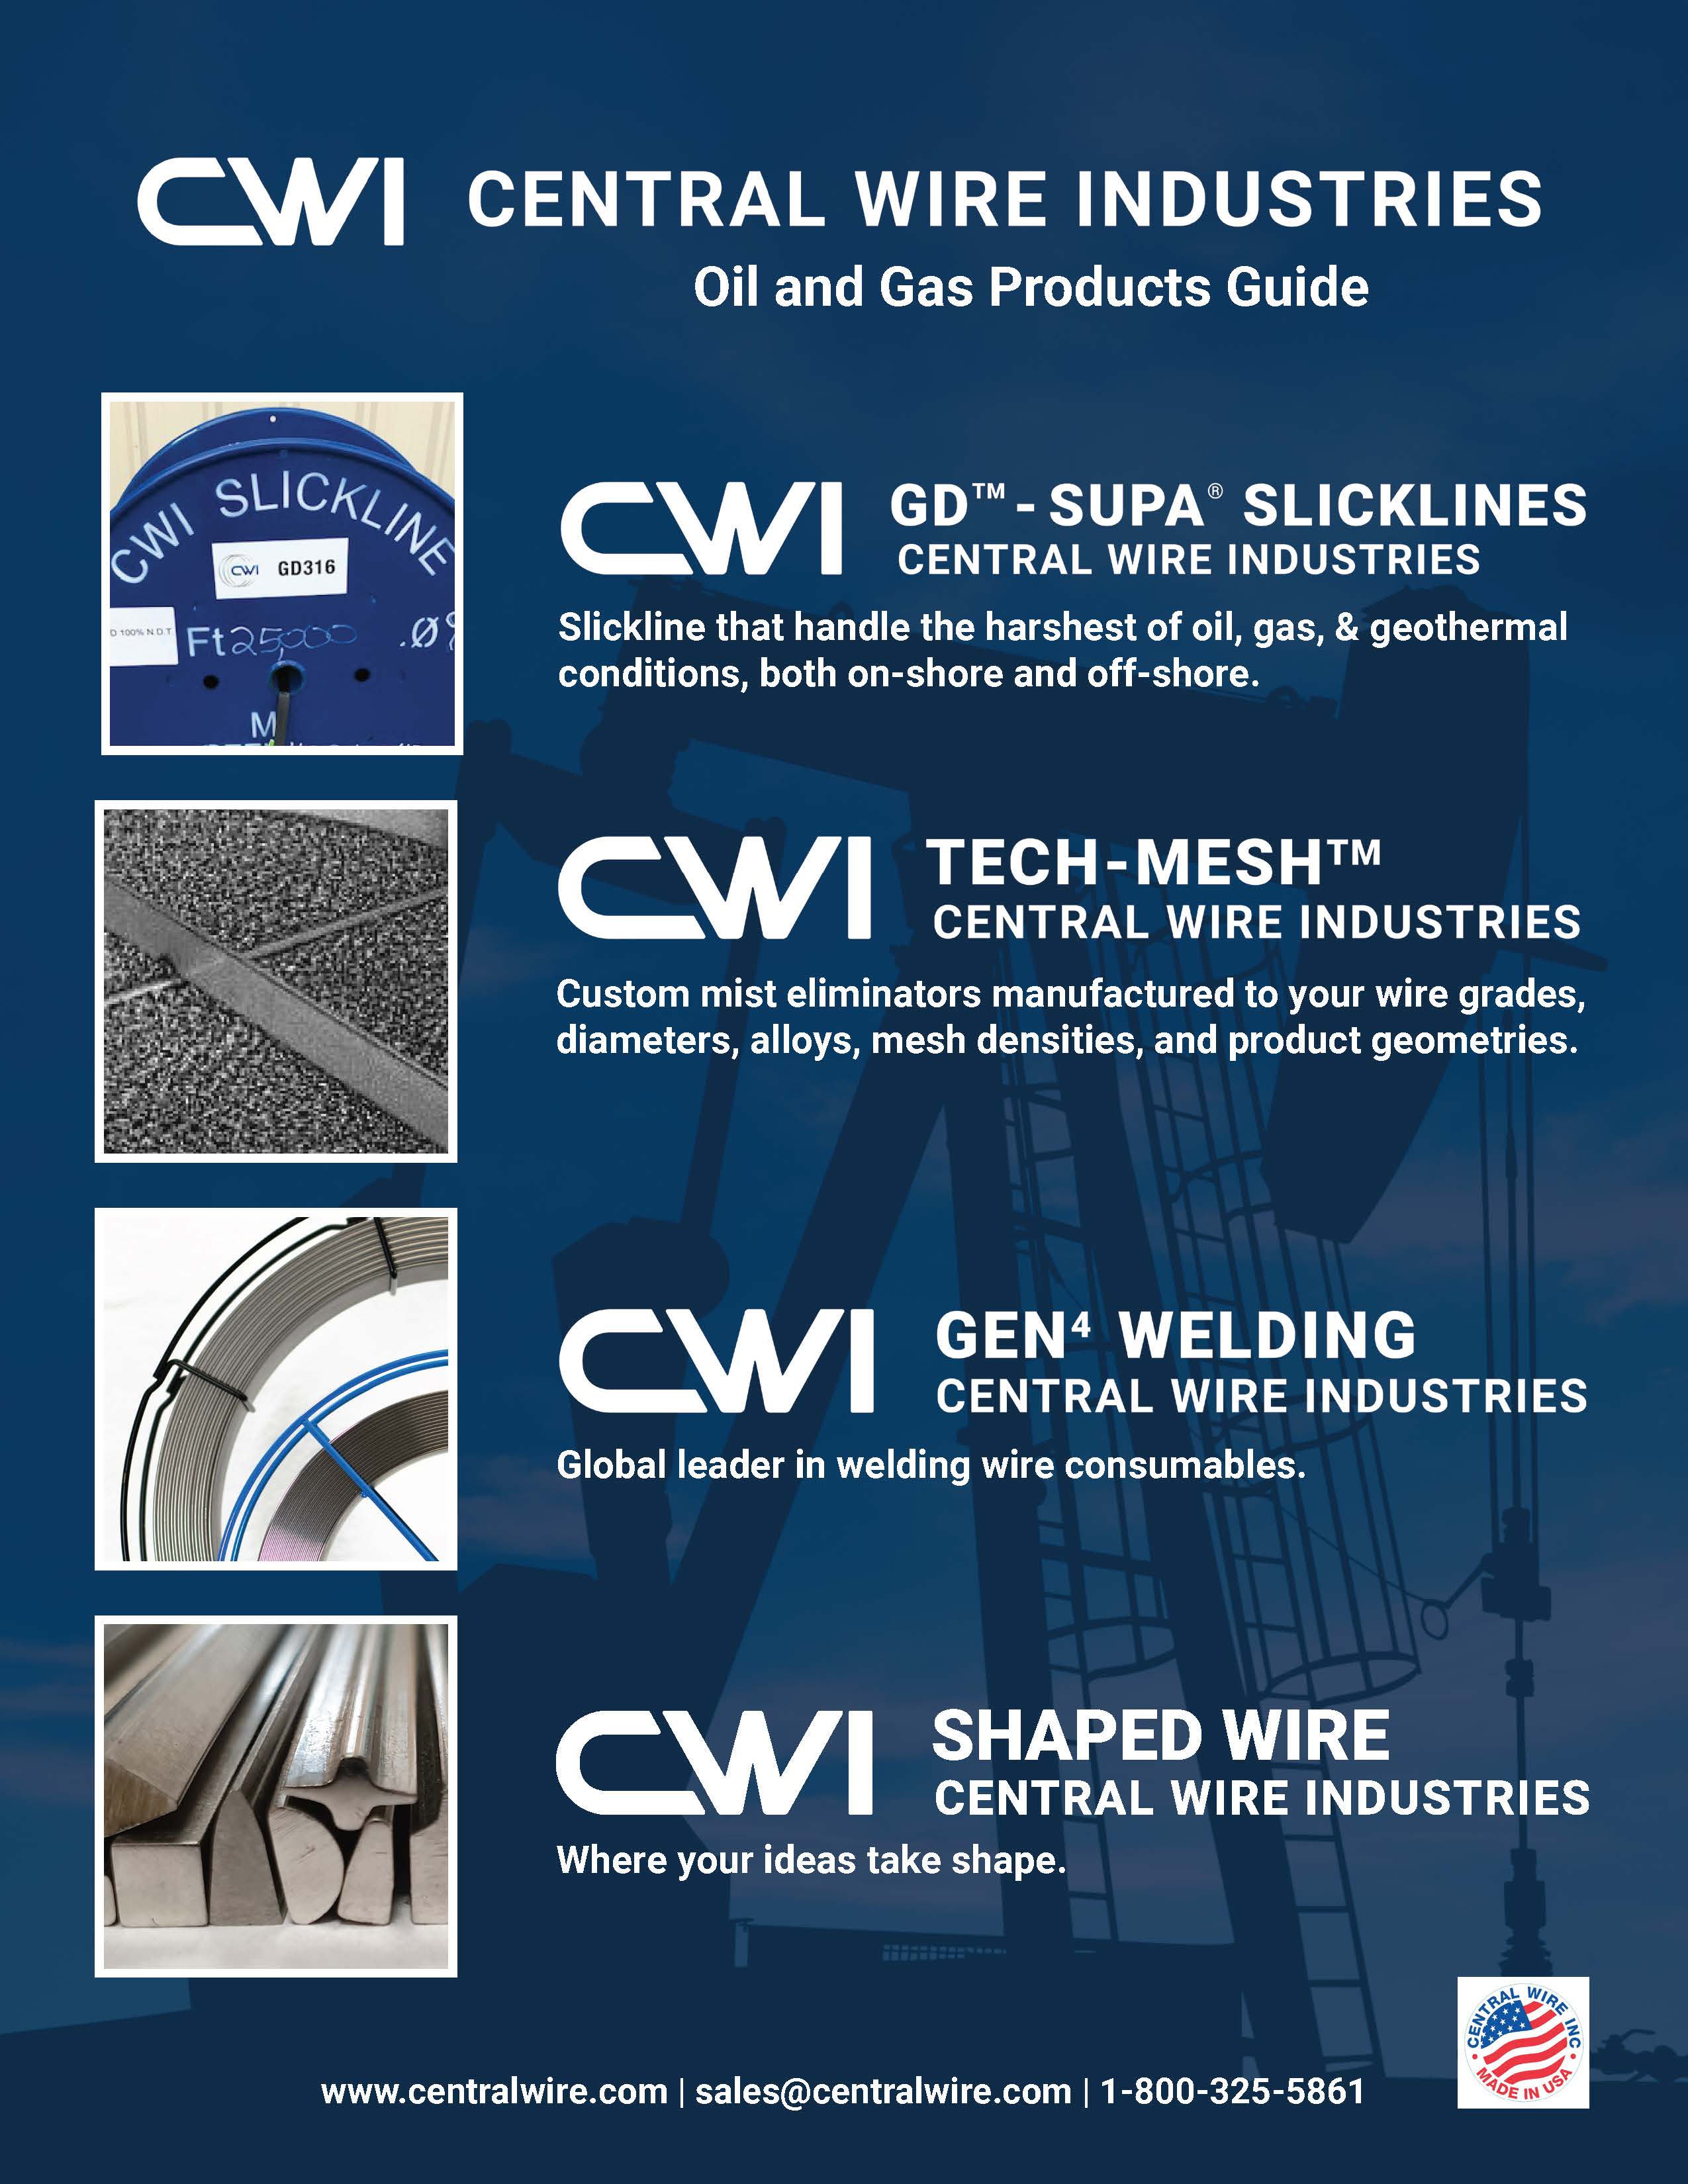 CWI: Serving the Entire Oil and Gas Industry